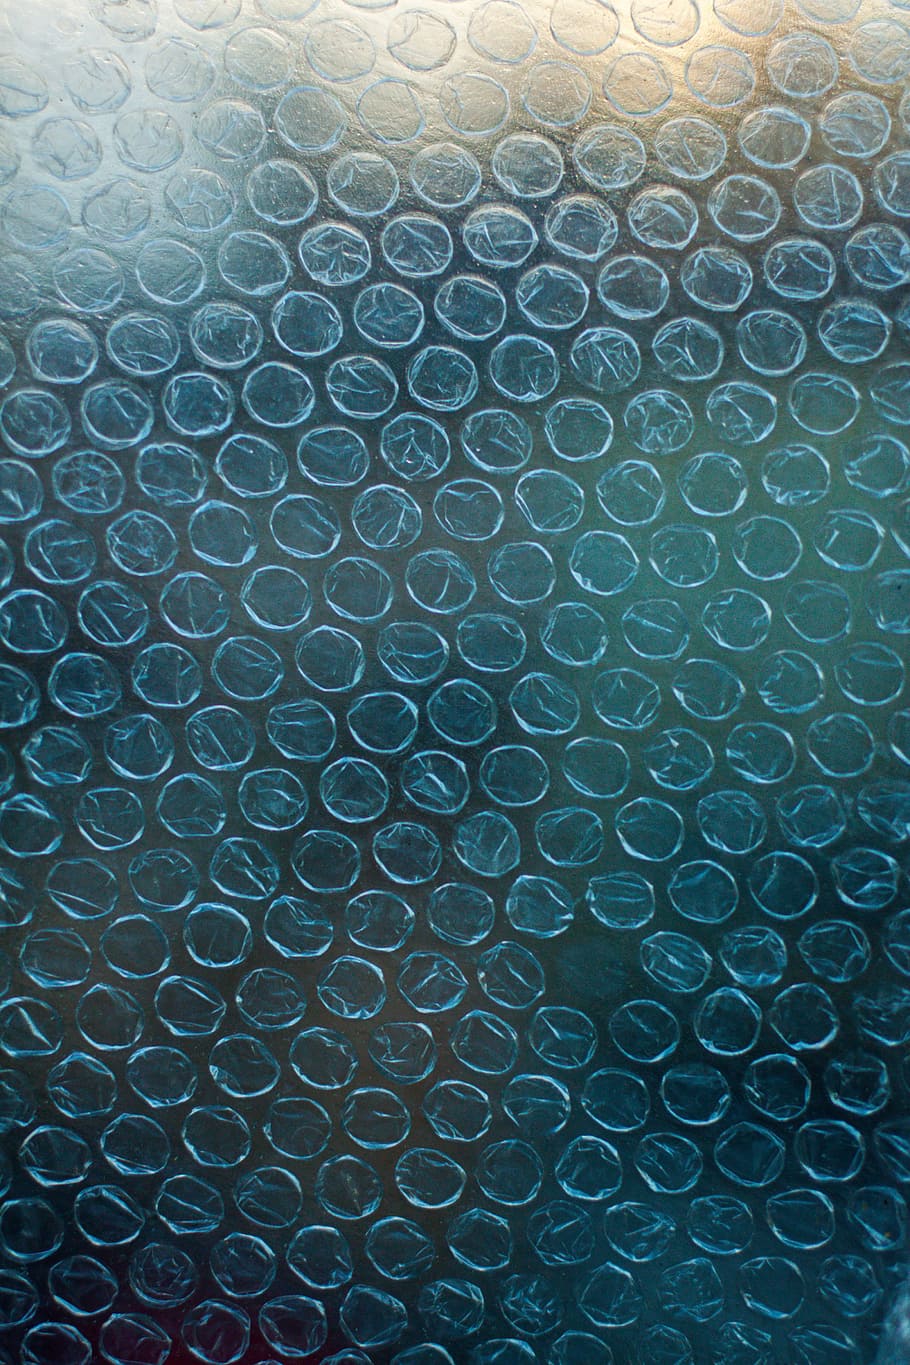 pattern, cellophane, plastic, bubble, backgrounds, textured, full frame, abstract, close-up, metal